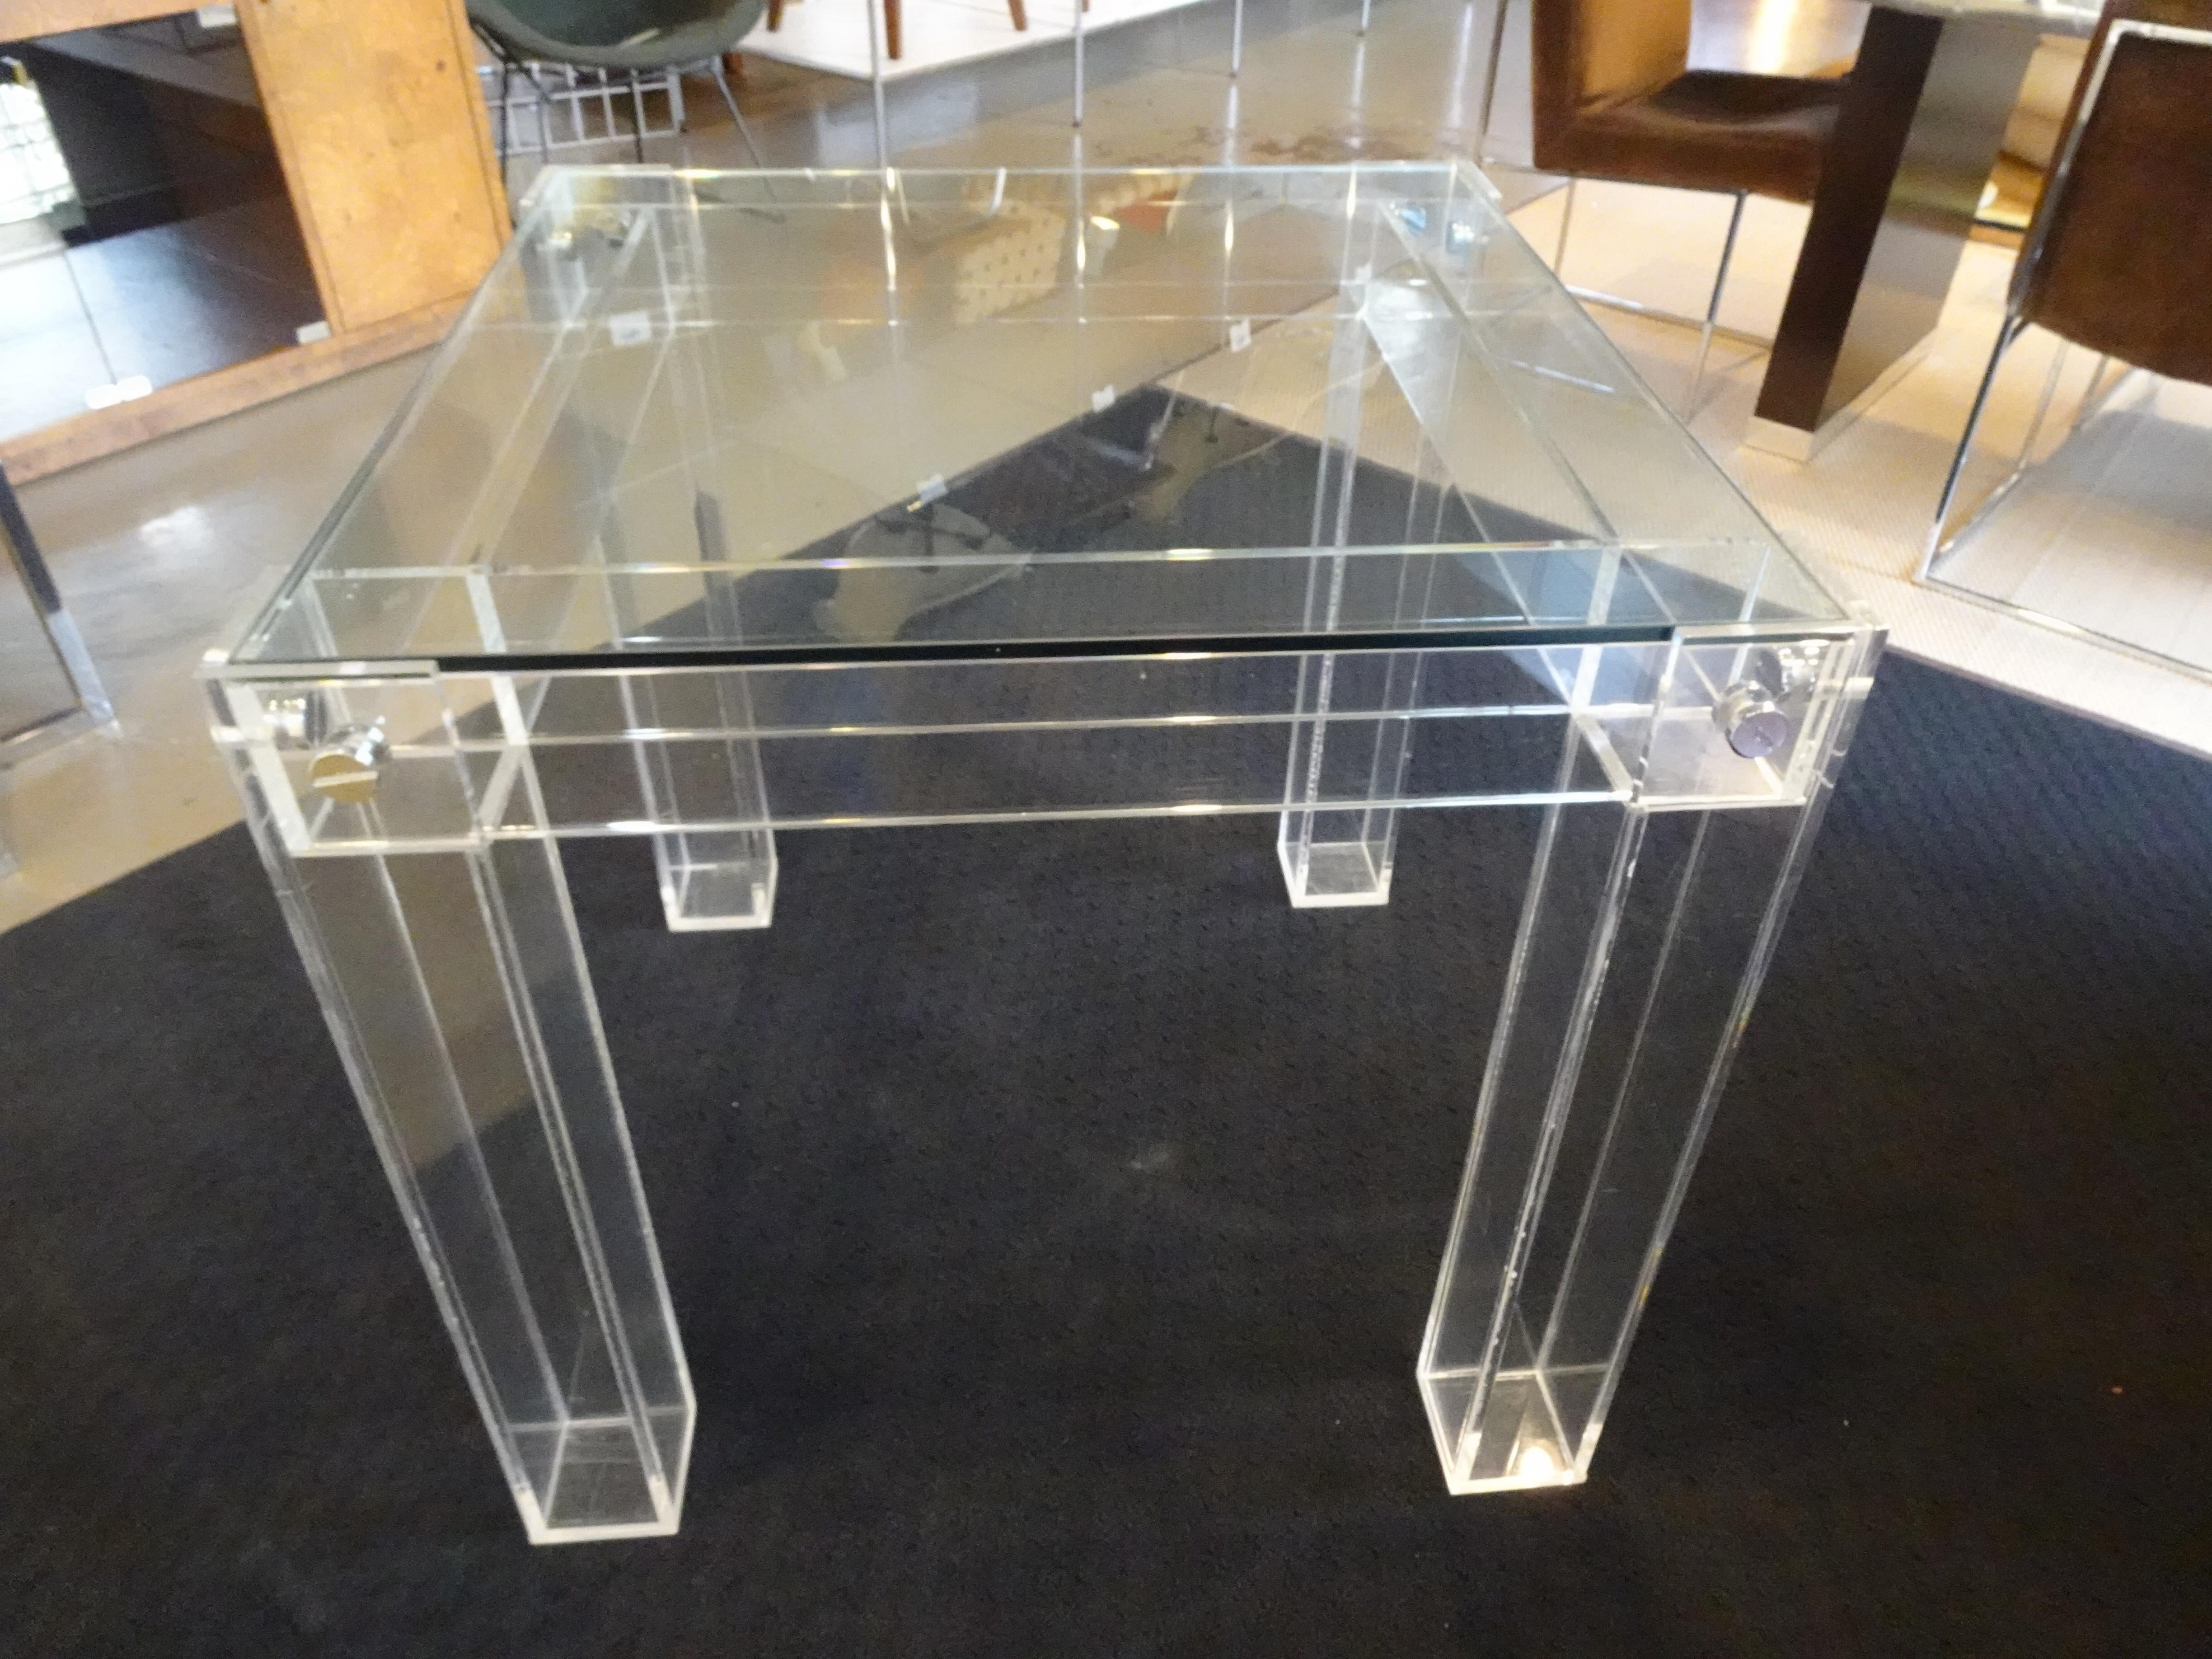 A well made Lucite Game table or small dining table with squared legs and frame structure with drop in plate glass top. Huge chrome screws attached the legs to the top frame giving the piece added detail and strength a great sized piece for a small